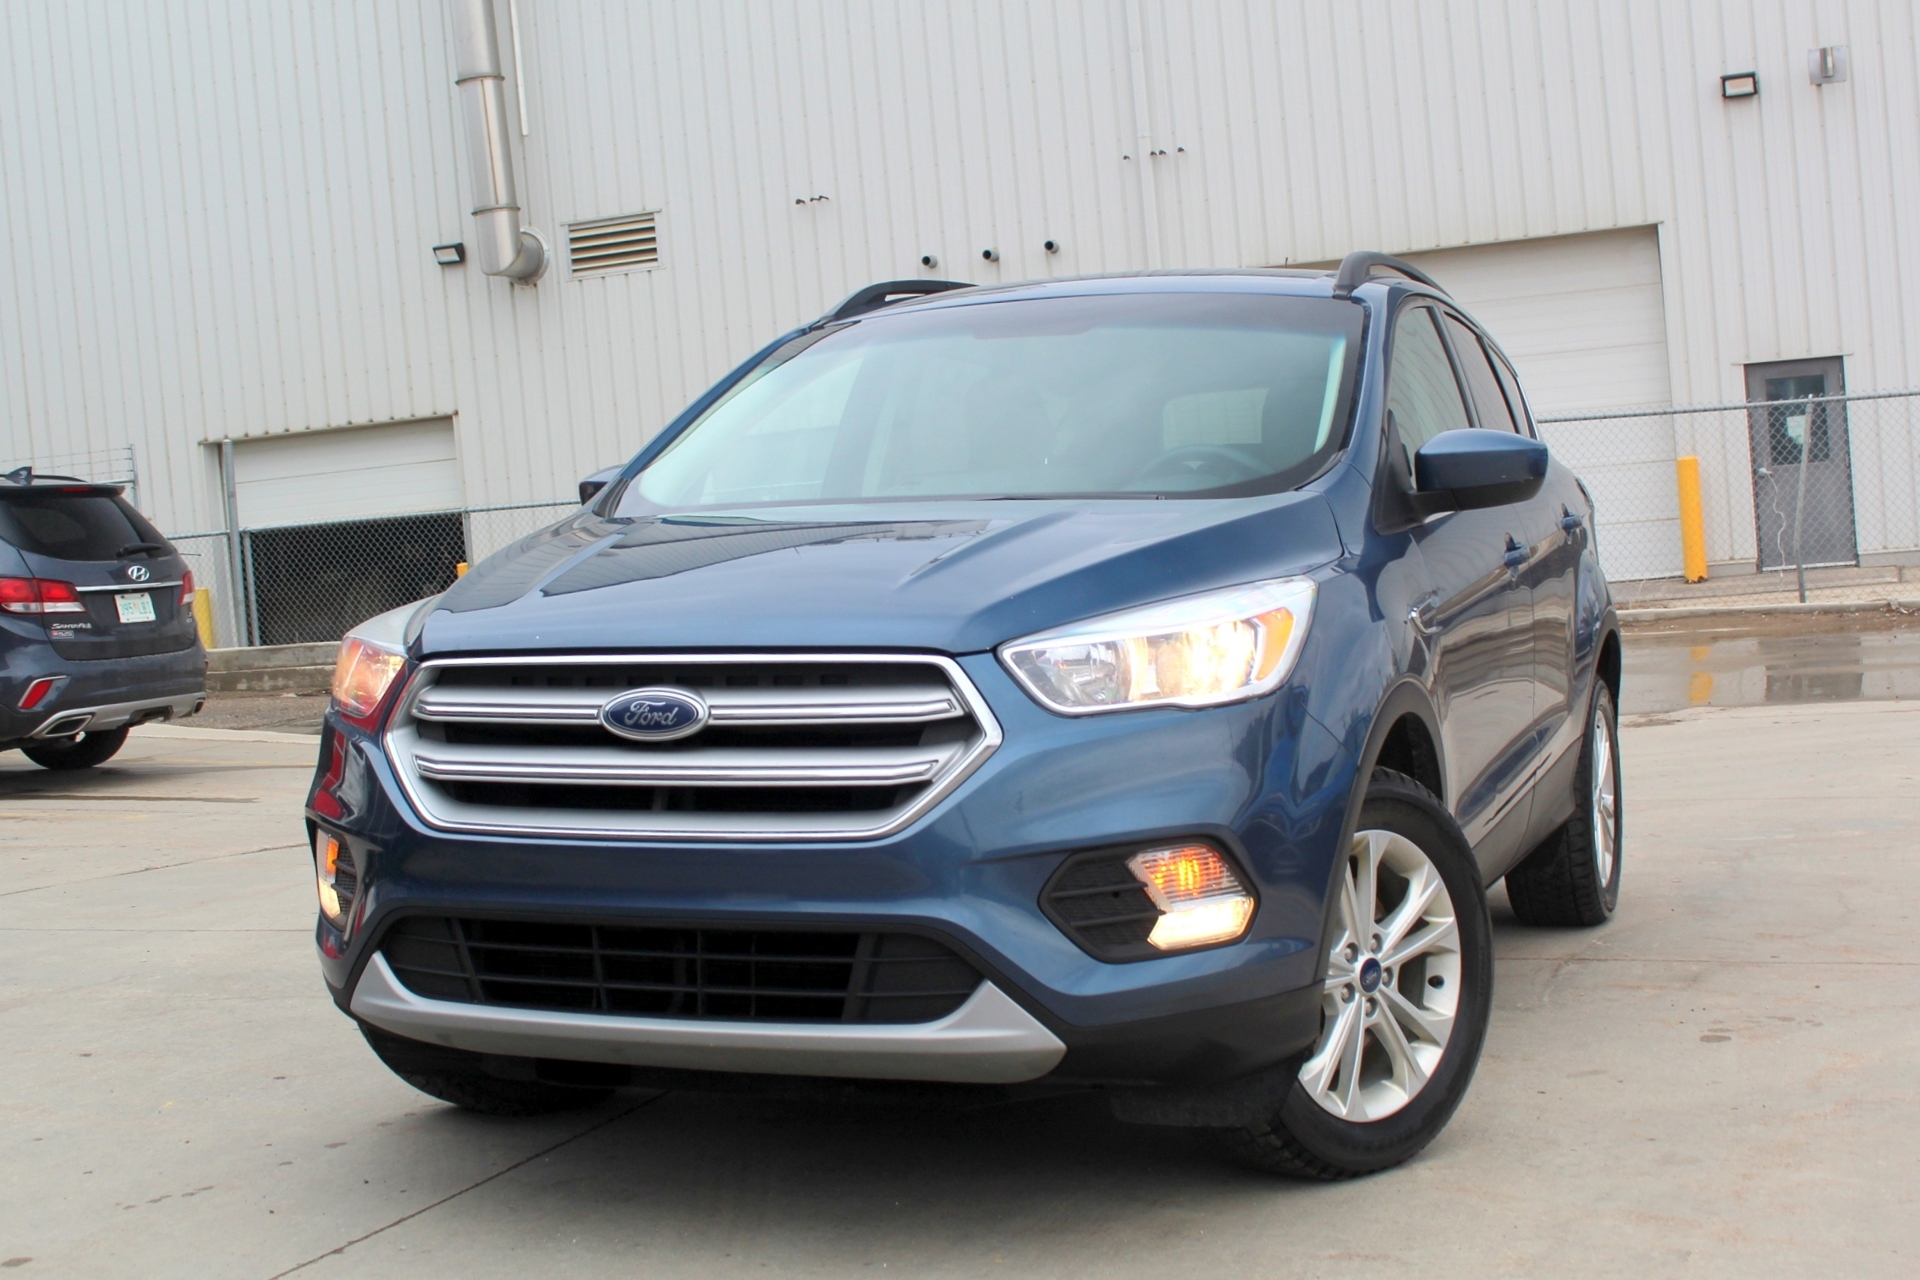 2018 Ford Escape SE - AWD - HEATED SEATS - SIRIUSXM - LOW KMS